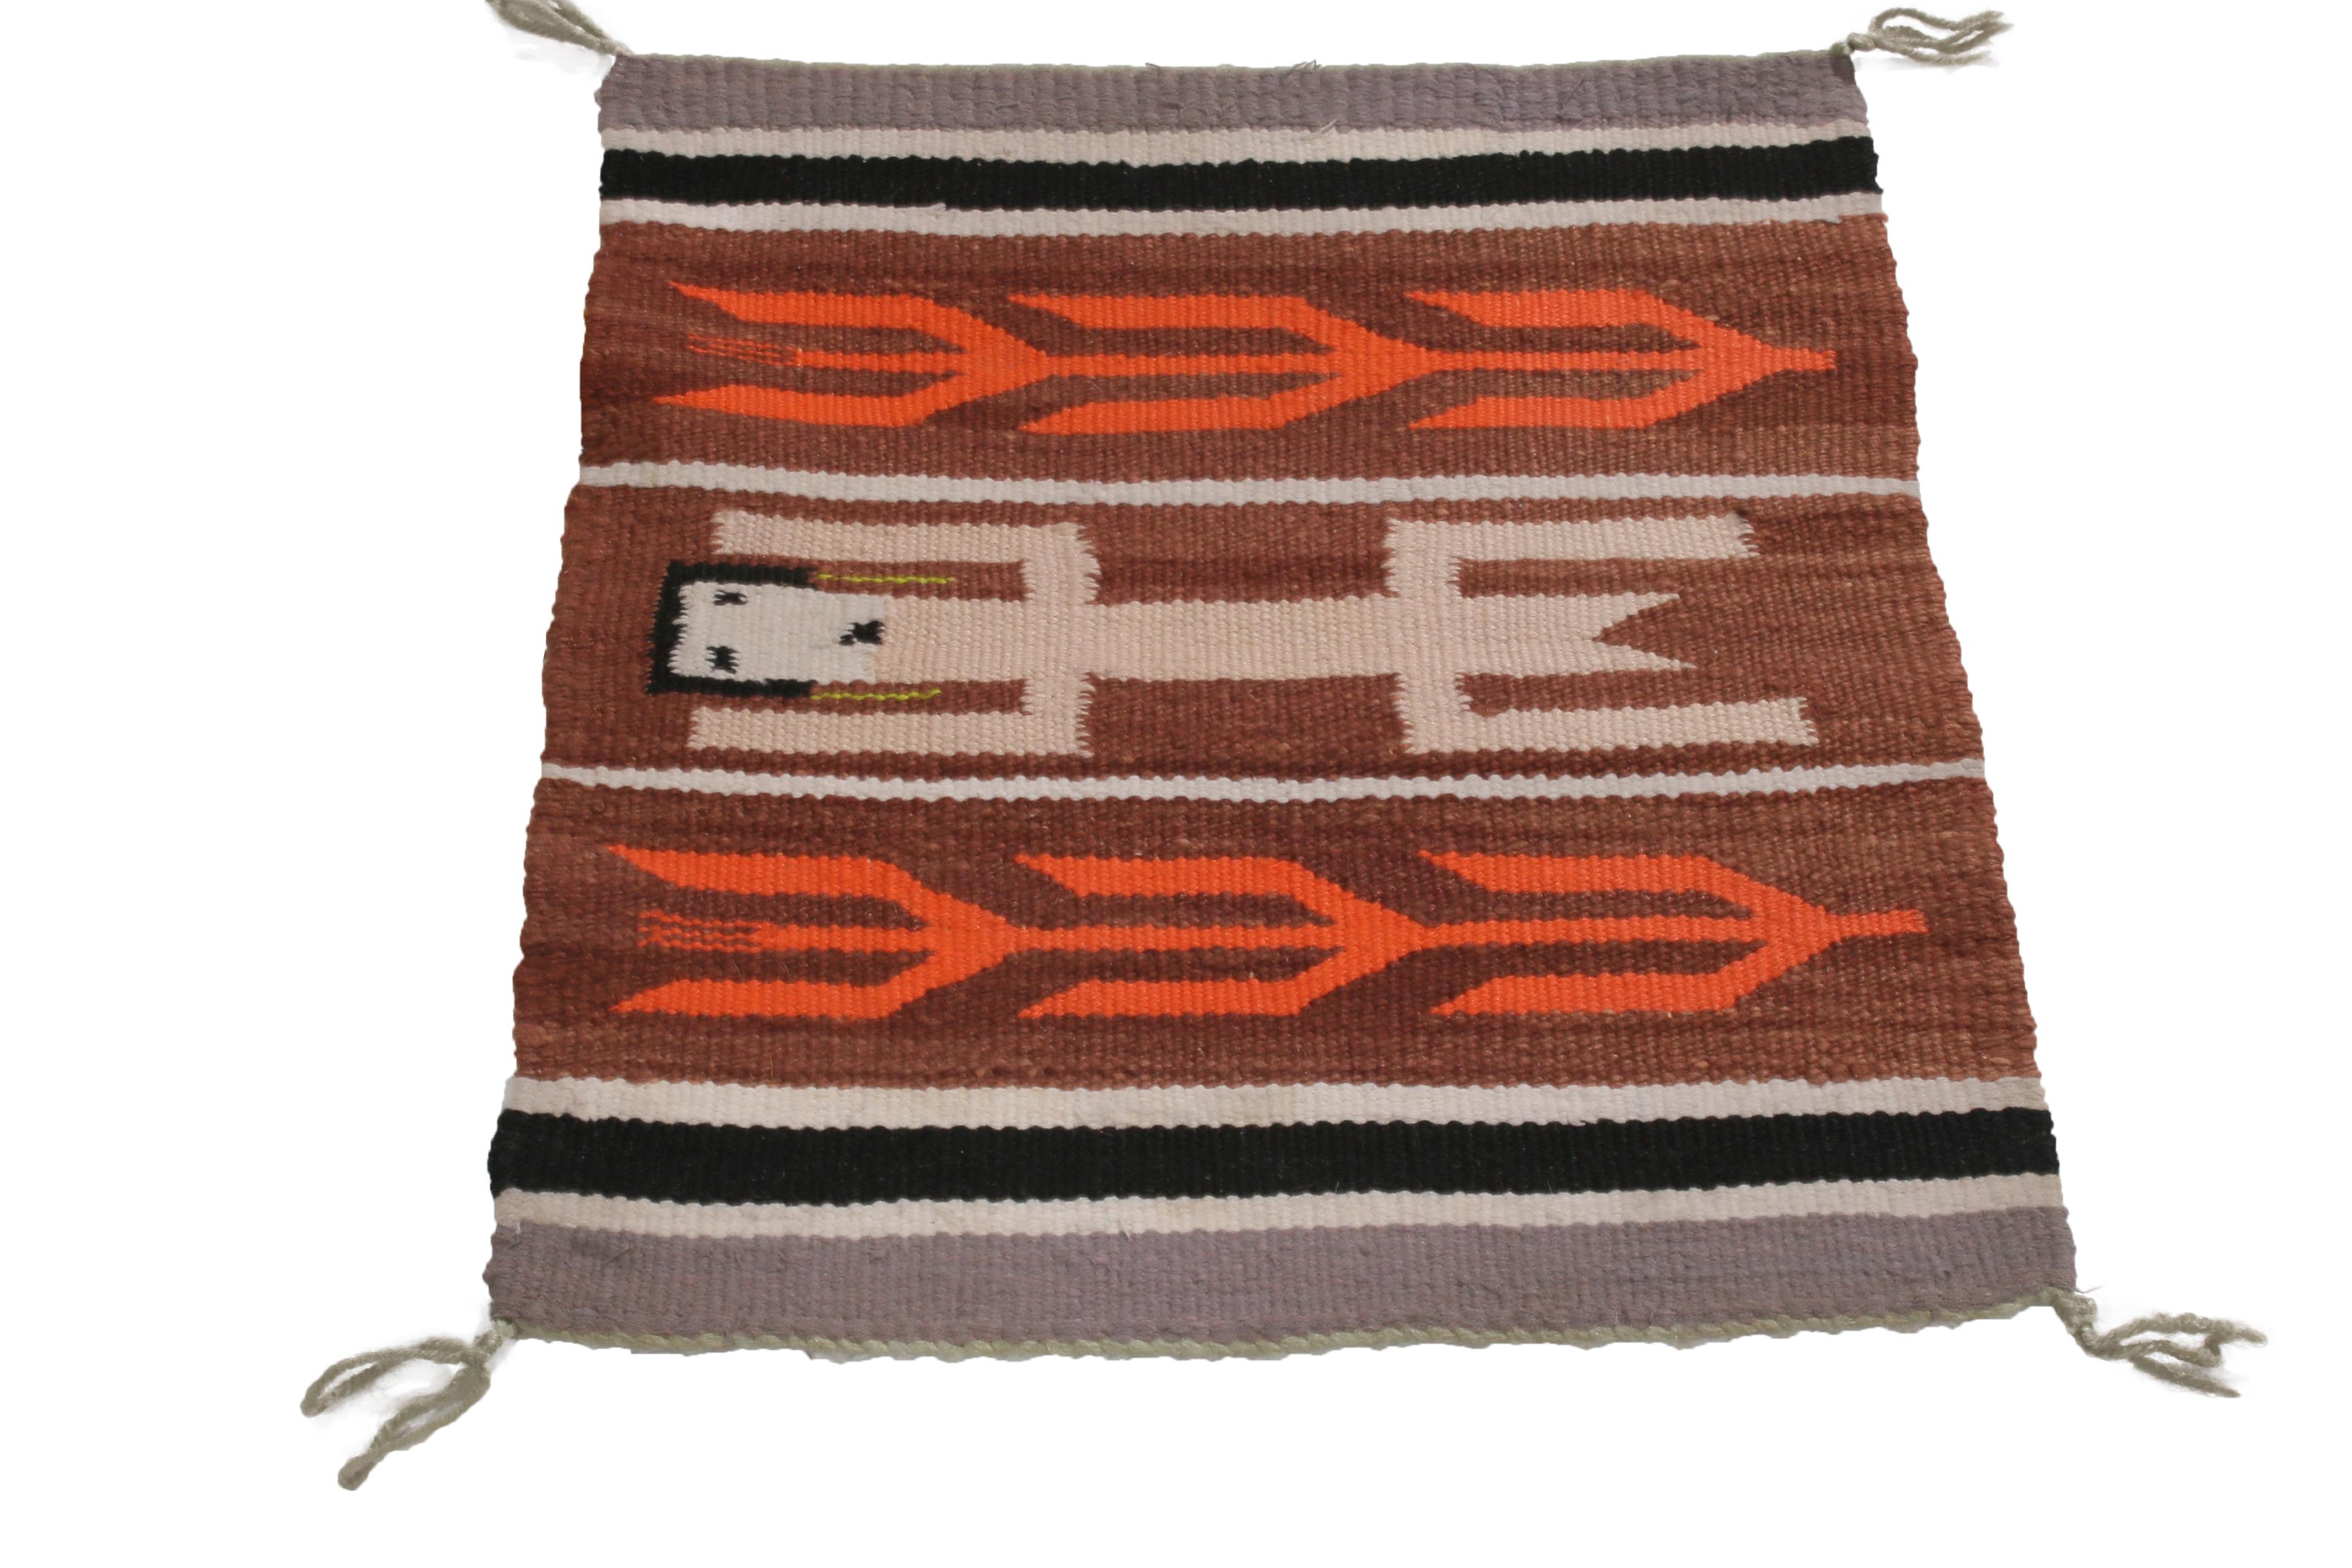 Hand knotted in quality wool from the United States in 1950, this vintage rug employs a marriage of both forgiving and engaging tribal colorways with symbols believed to hail from the Native American Navajo tribe. As one of the largest native tribes